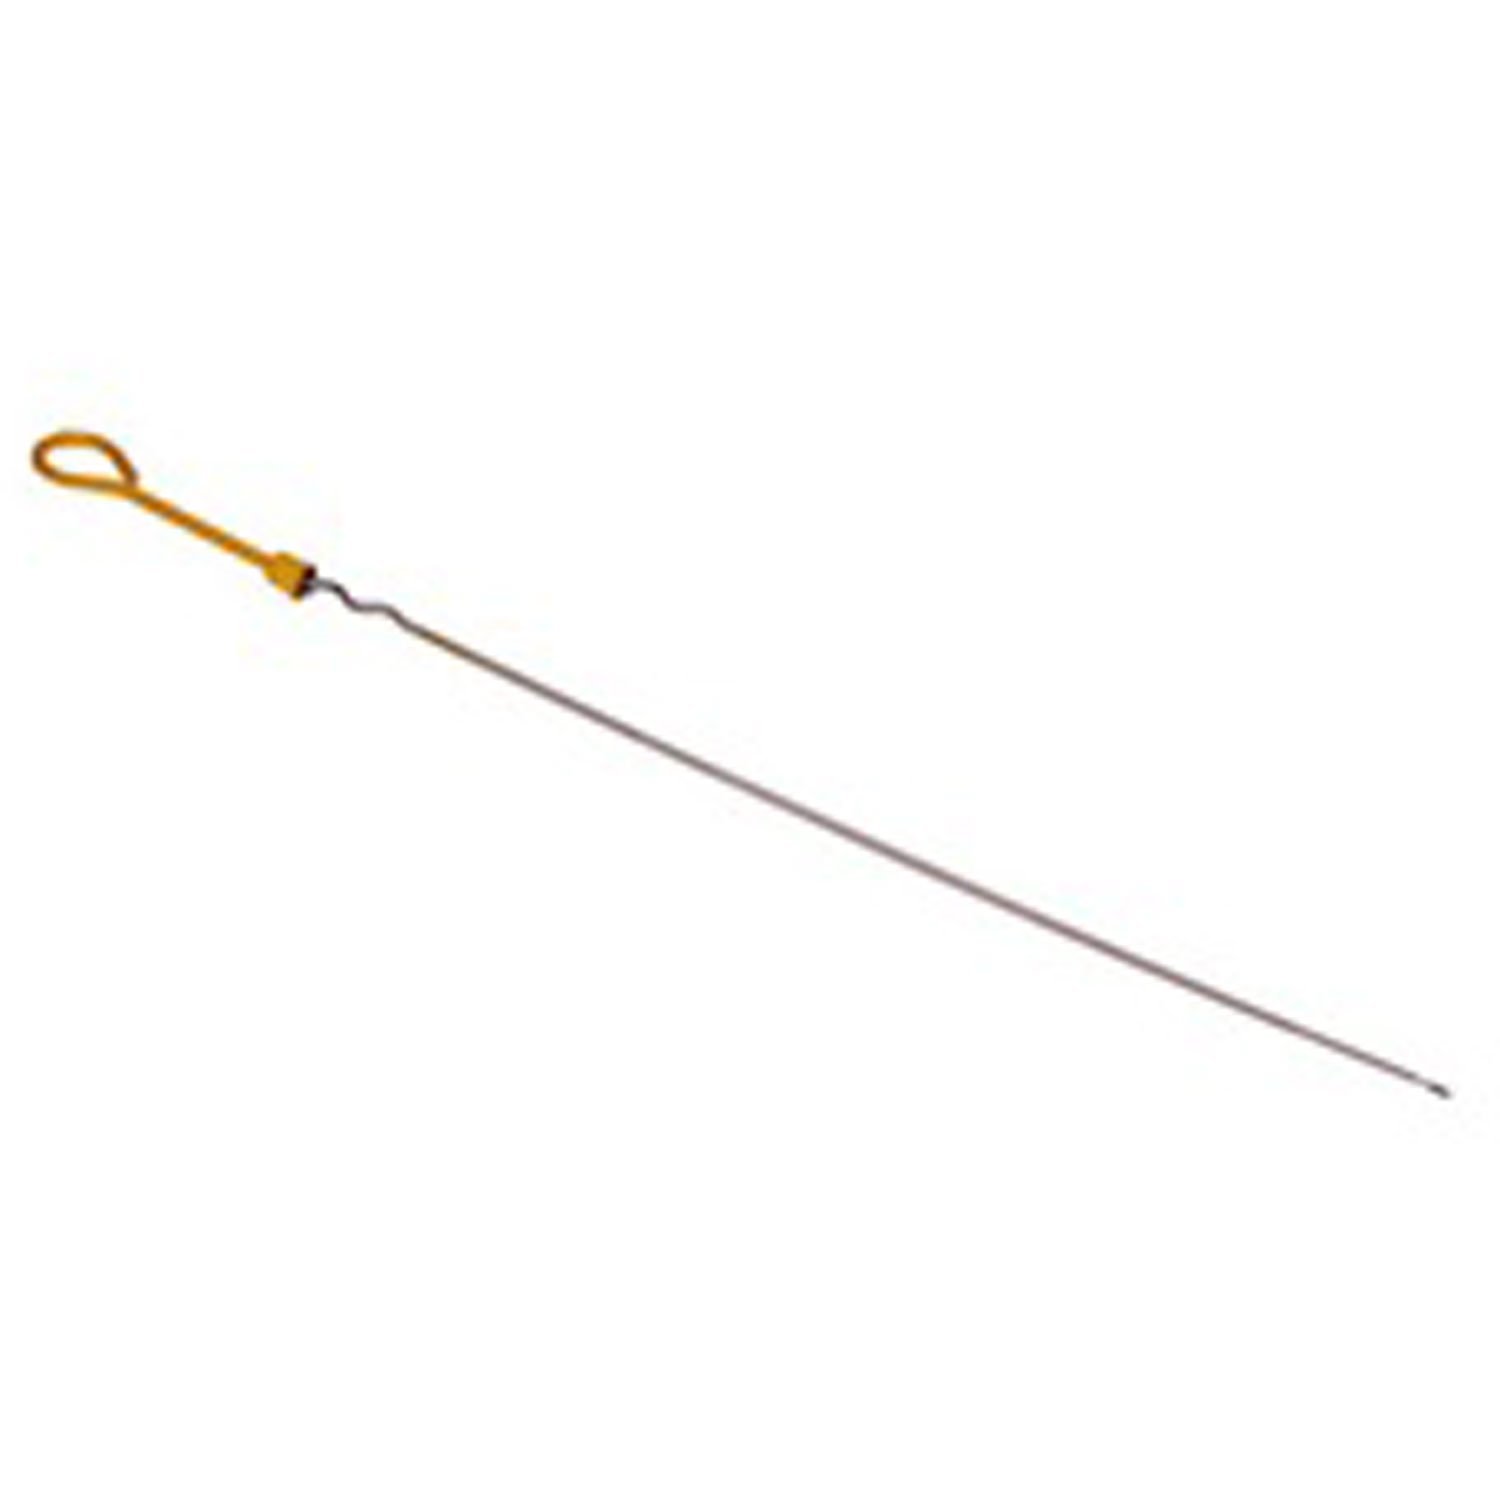 Replacement oil dipstick from Omix-ADA, Fits 97-99 Jeep Wrangler TJ with 2.5 liter engines.